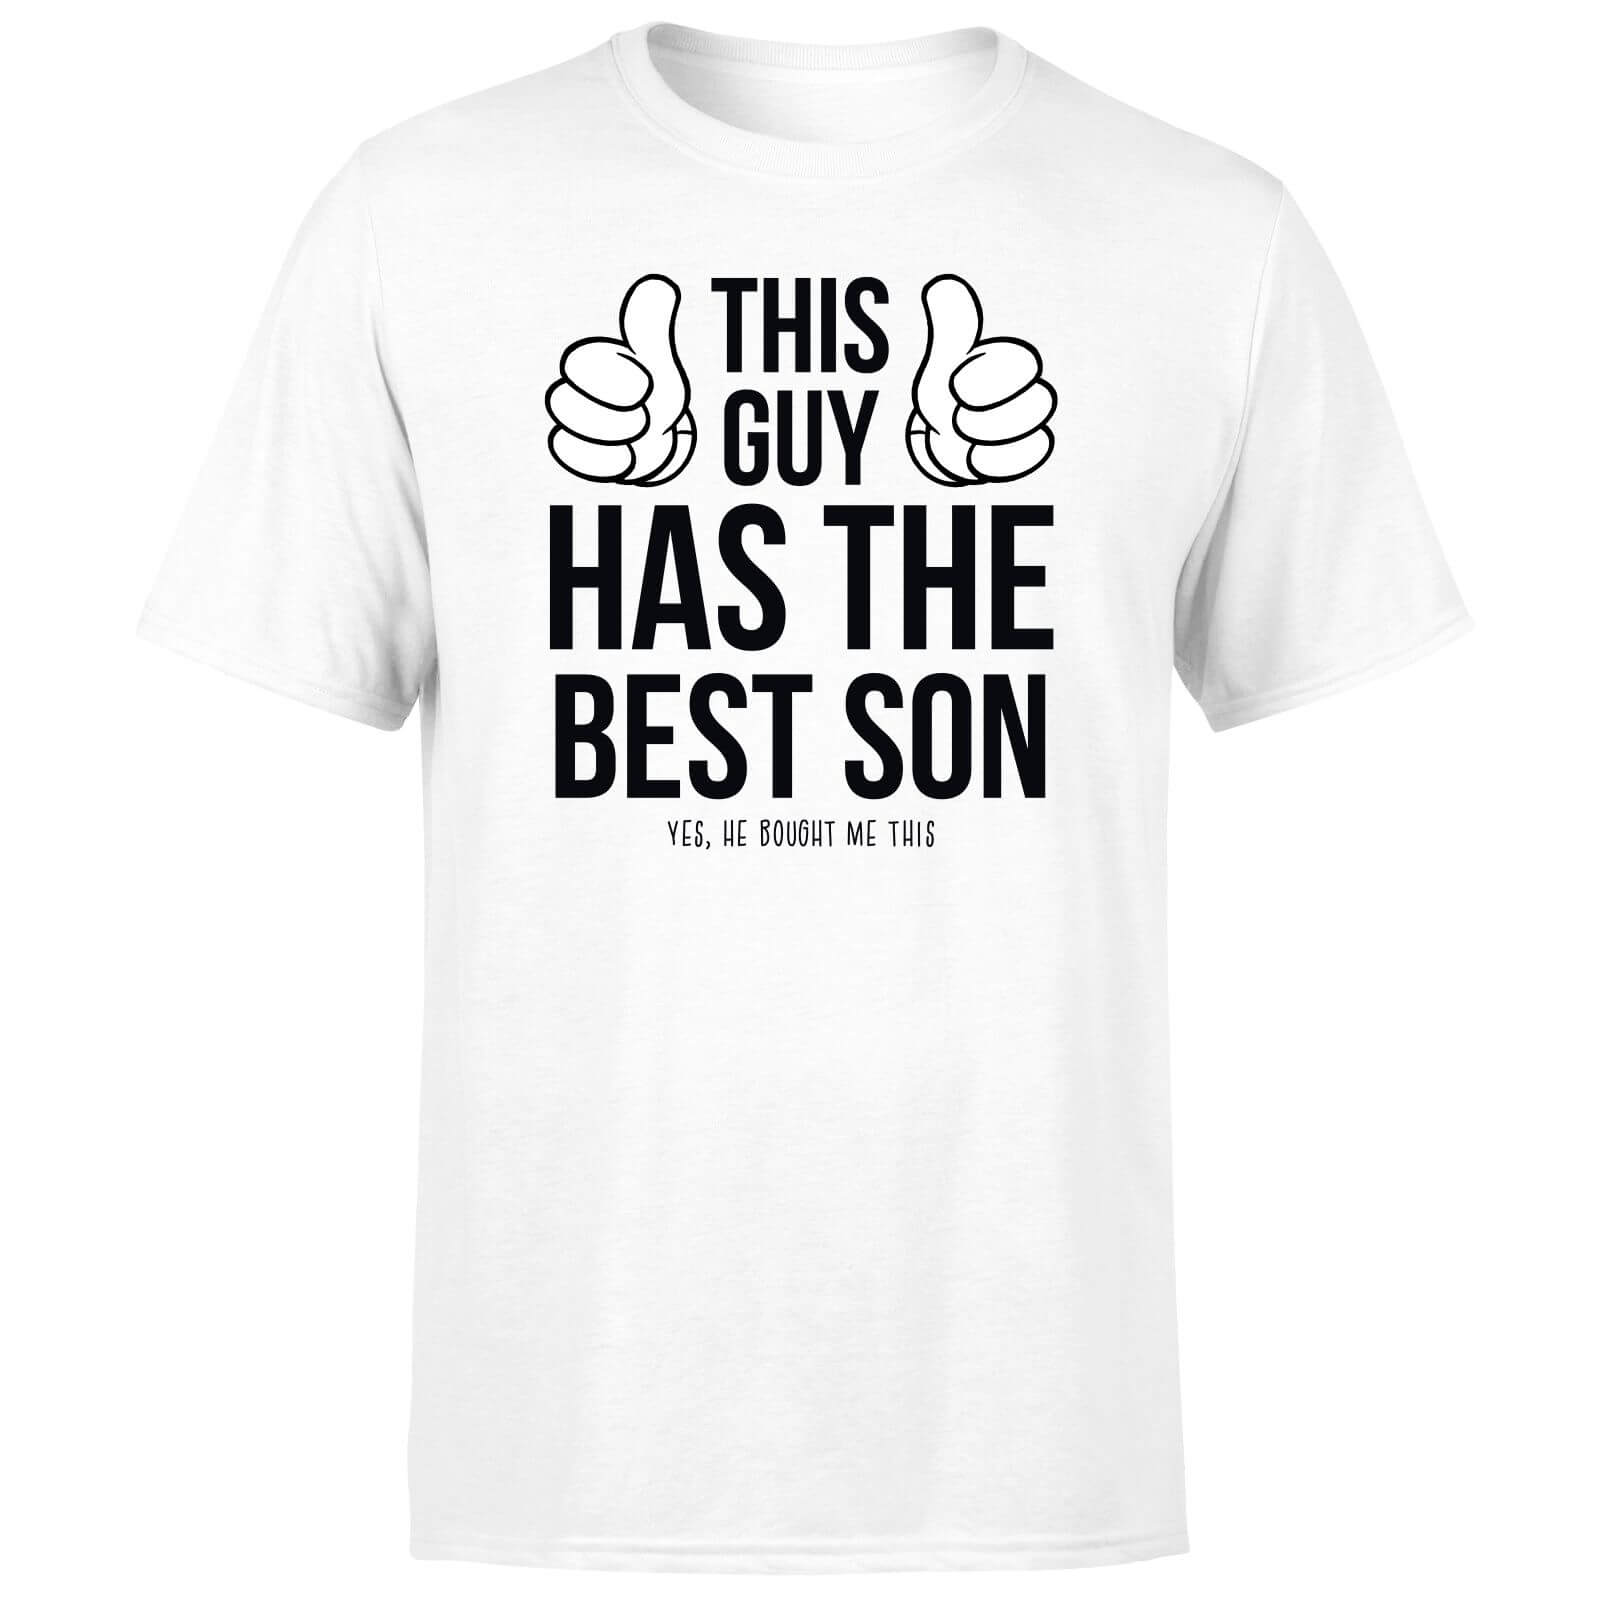 This Guy Has The Best Son Men's T-Shirt - White - S